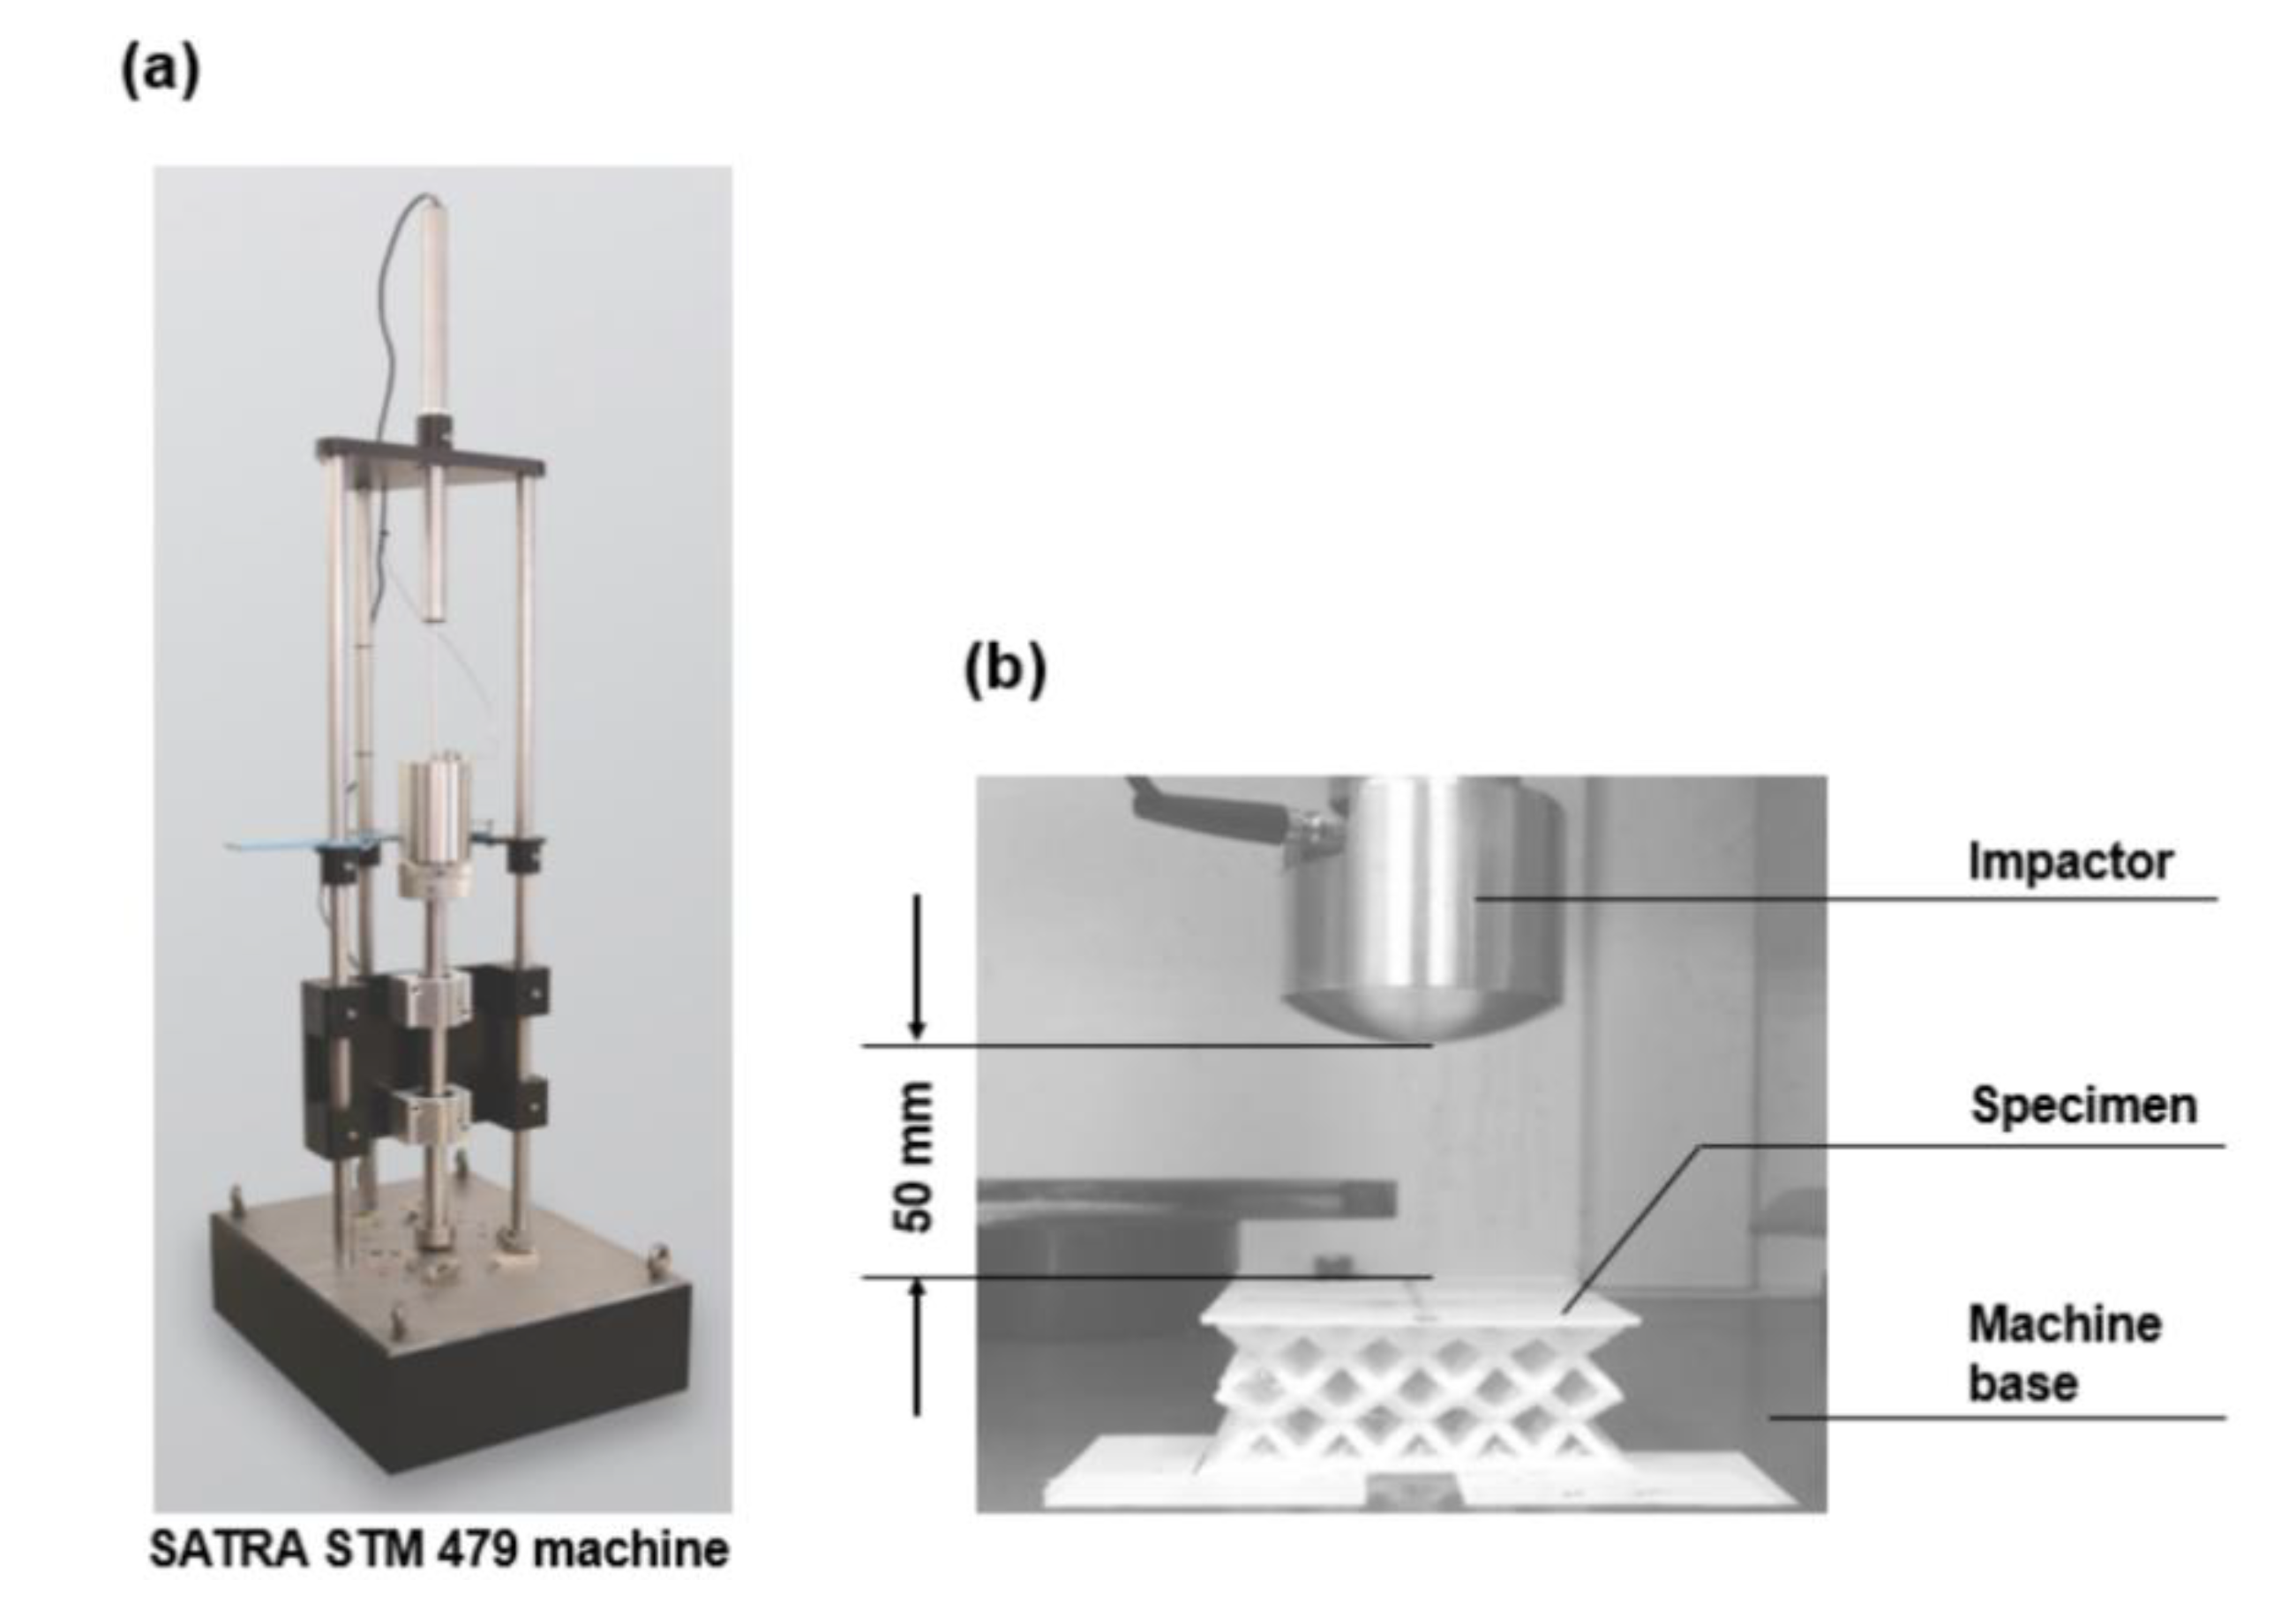 Polymers Free Full-Text | The Dynamic Impact Response of 3D-Printed Polymeric Sandwich Structures with Cores: Numerical and Experimental Investigation